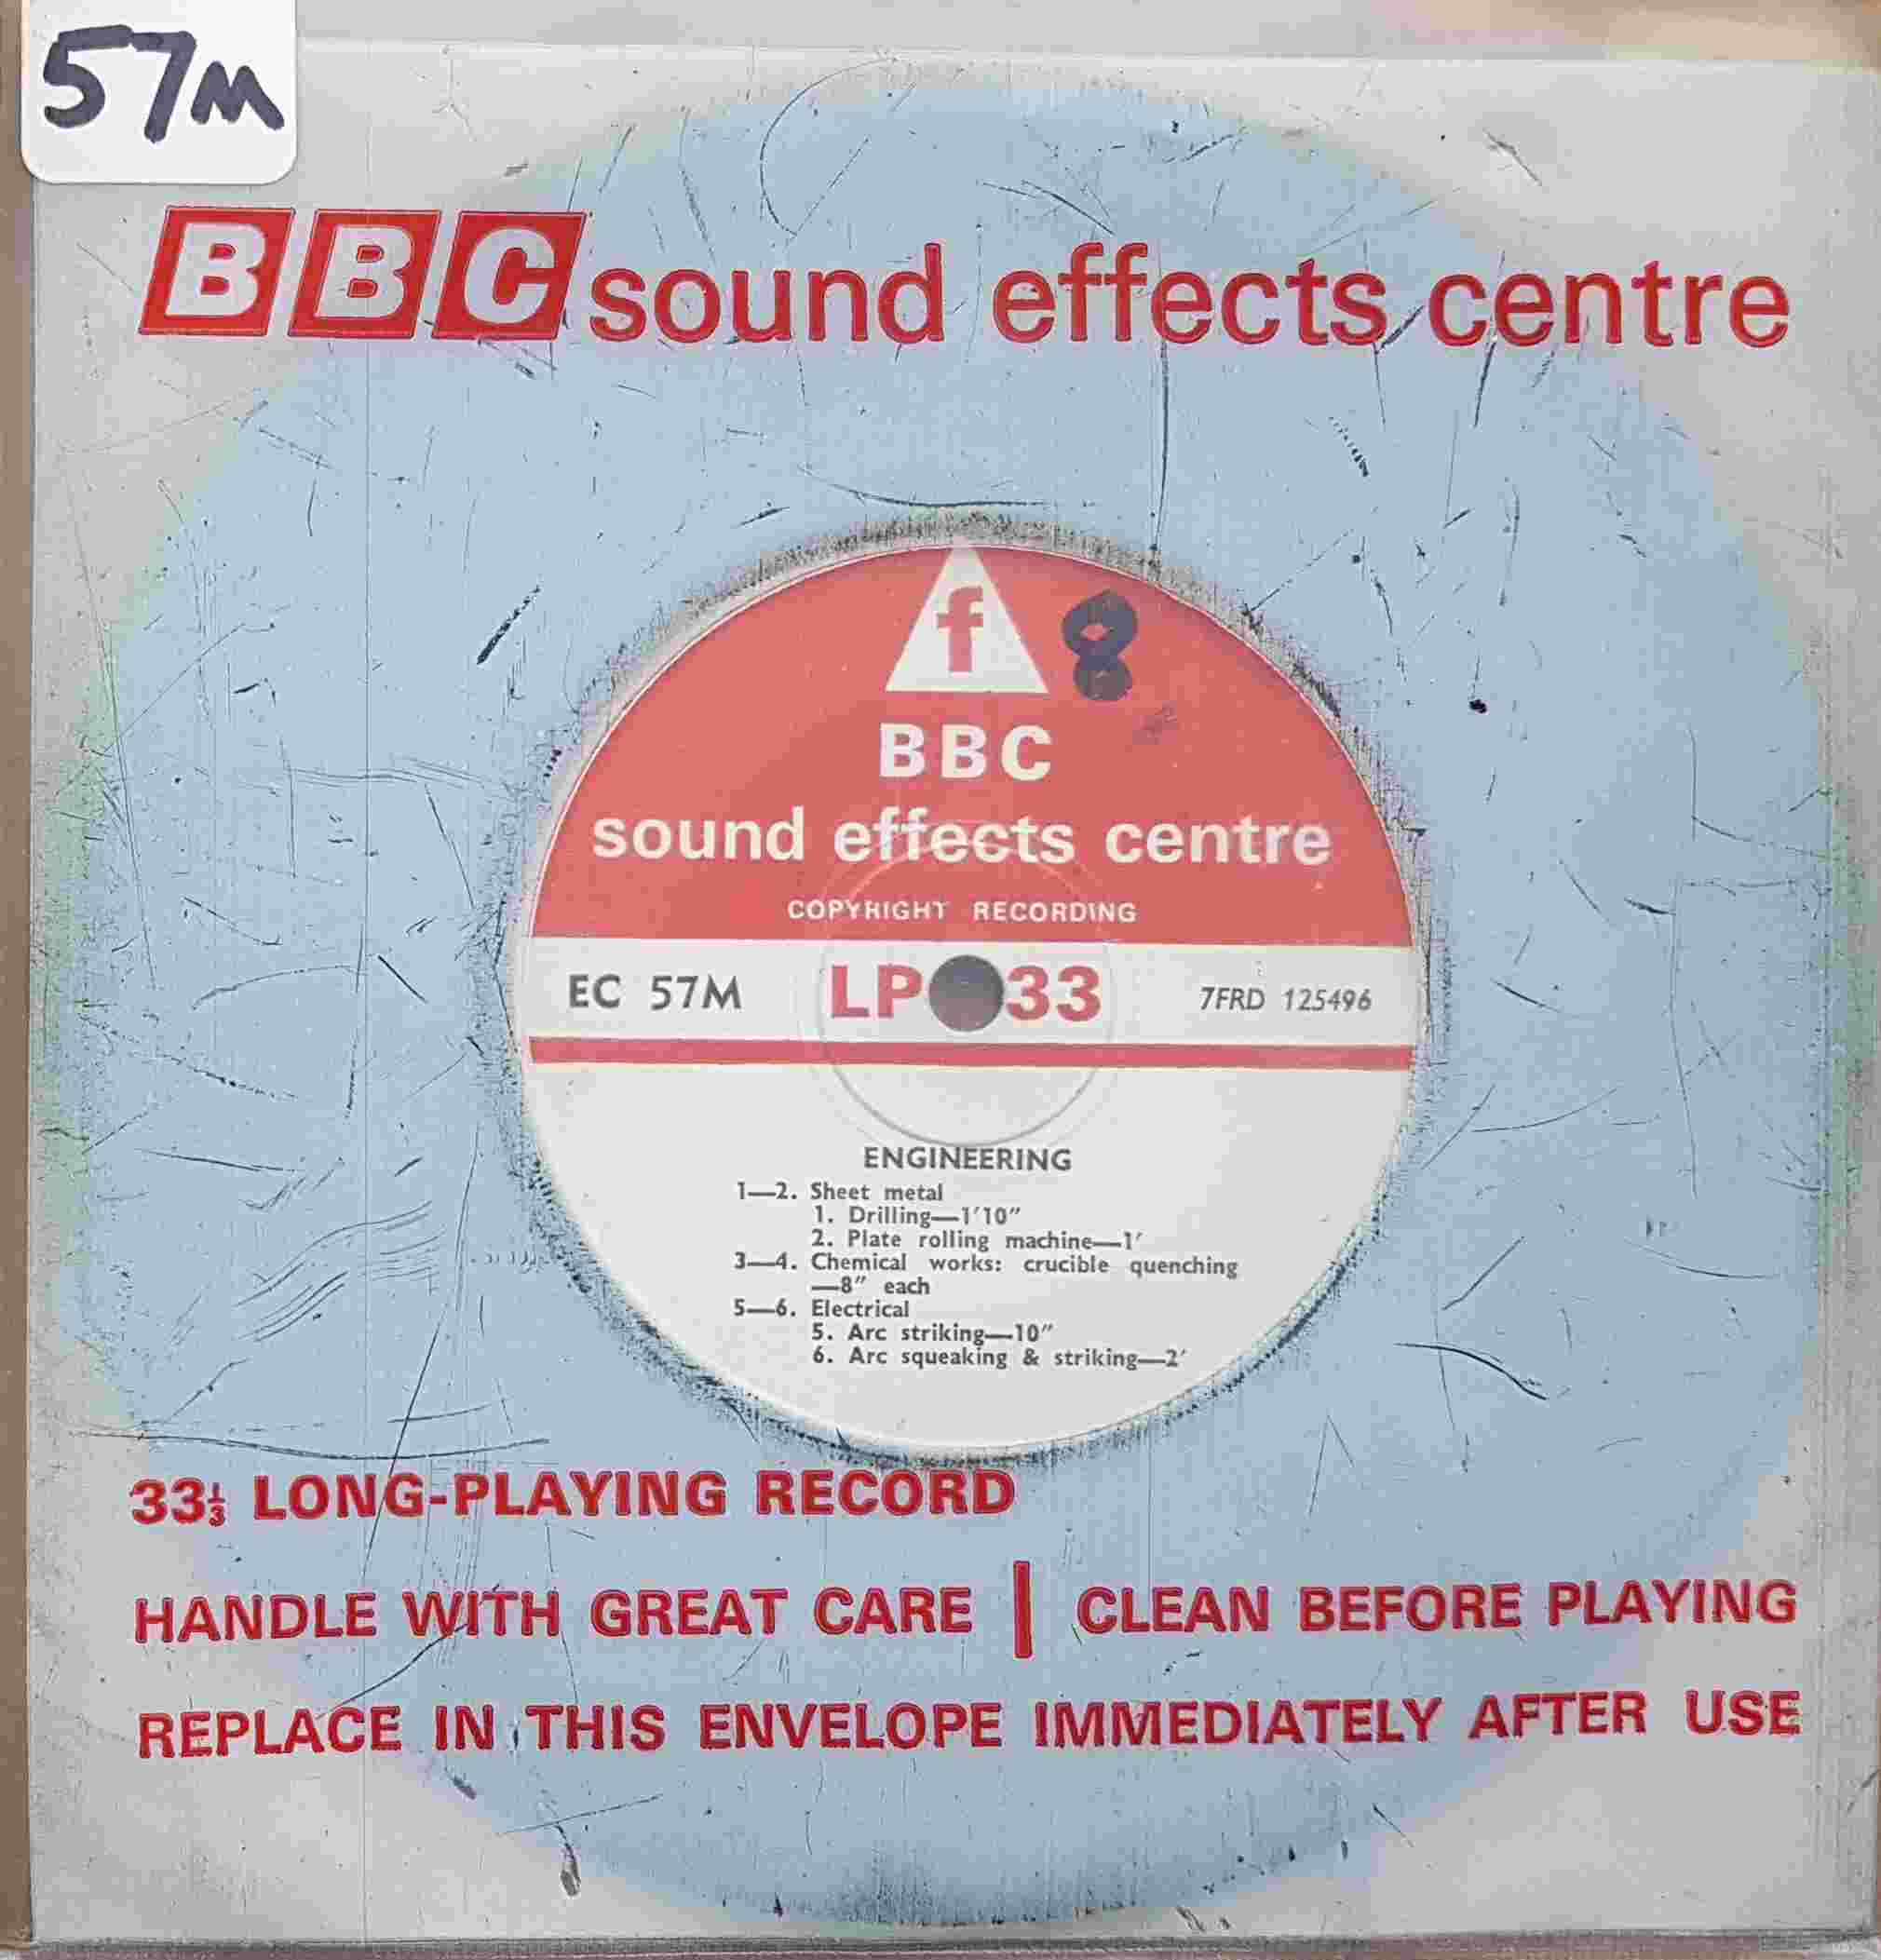 Picture of EC 57M Engineering by artist Not registered from the BBC records and Tapes library